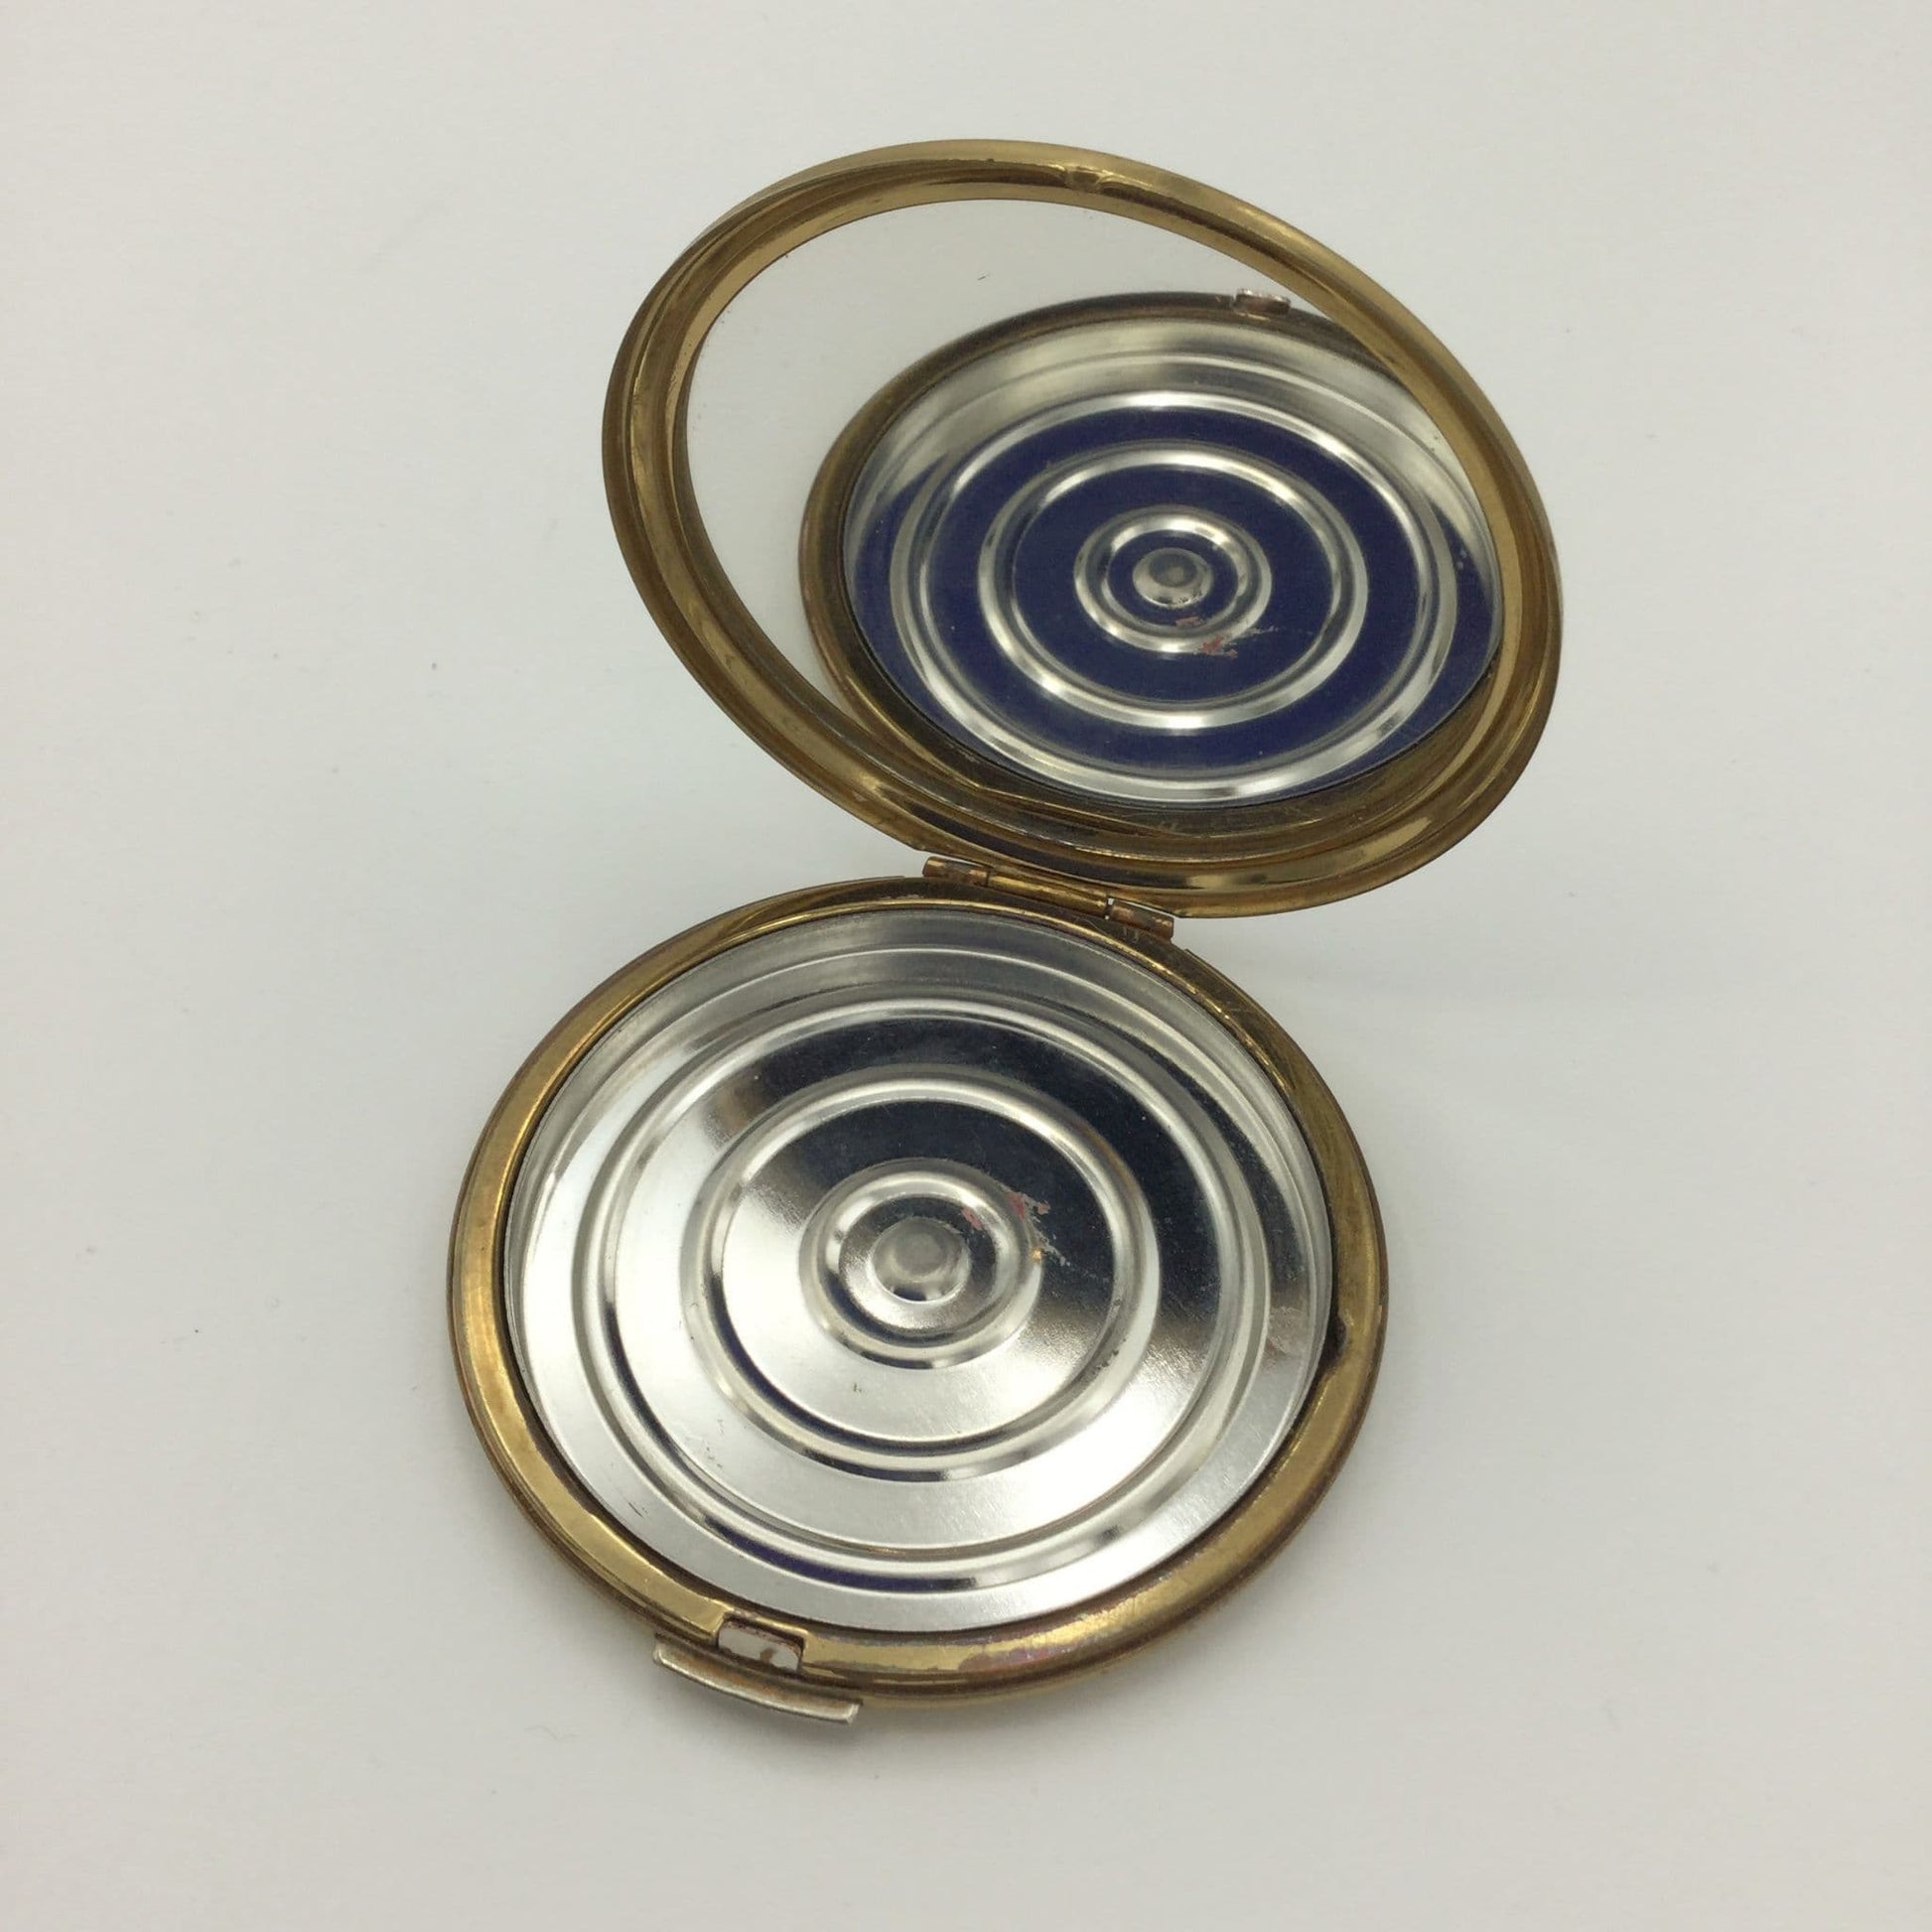 open Stratton compact showing clear mirror and inner base